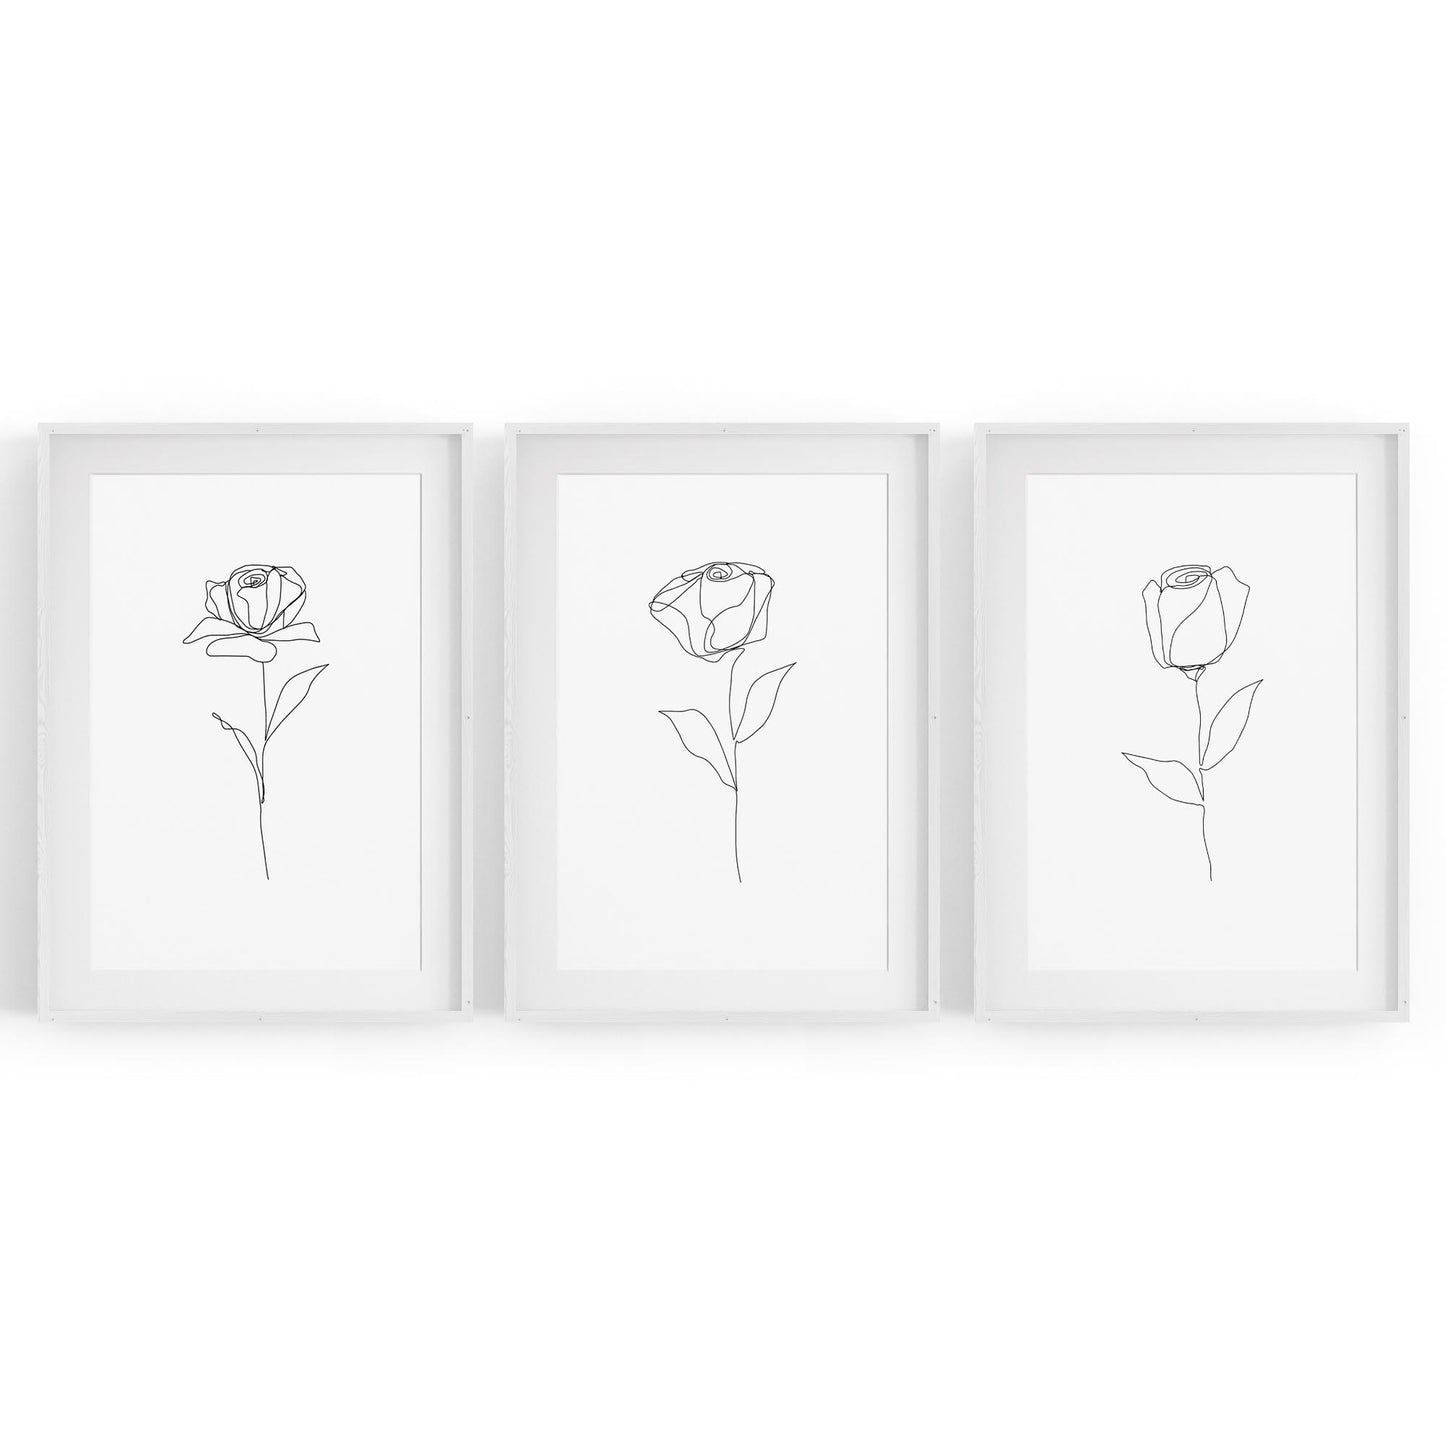 Set of Minimal Flower Line Drawings Wall Art #1 - The Affordable Art Company